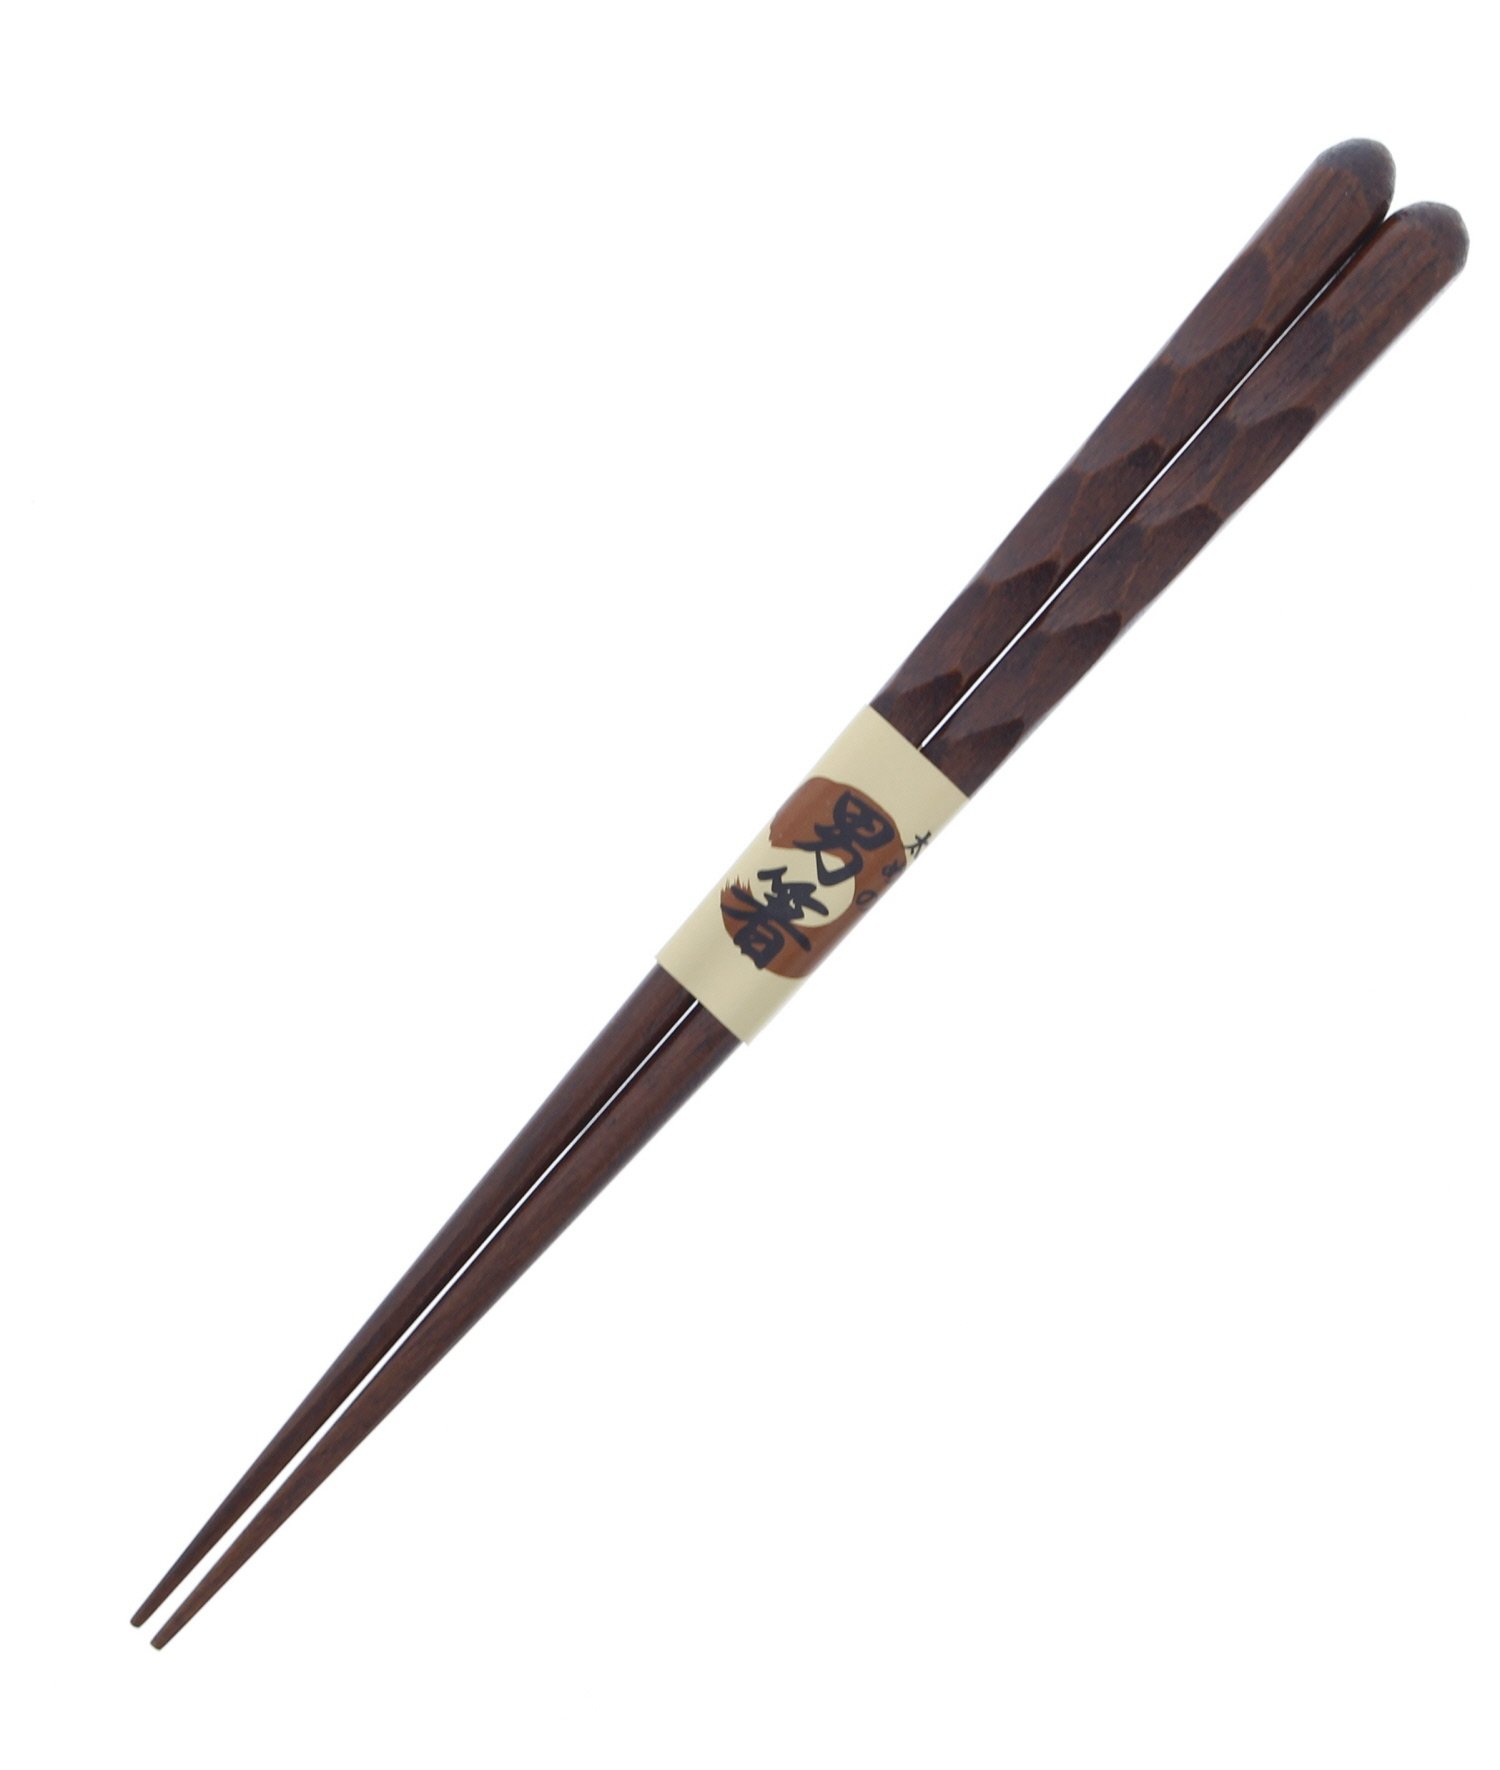 Ishida Chopsticks, Made in Japan, For Men, Thick, Random Carved, 1.5 inches (23.5 cm), Wooden (Natural Wood), Lacquer, Corner Point, 9.3 inches (23.5 cm)